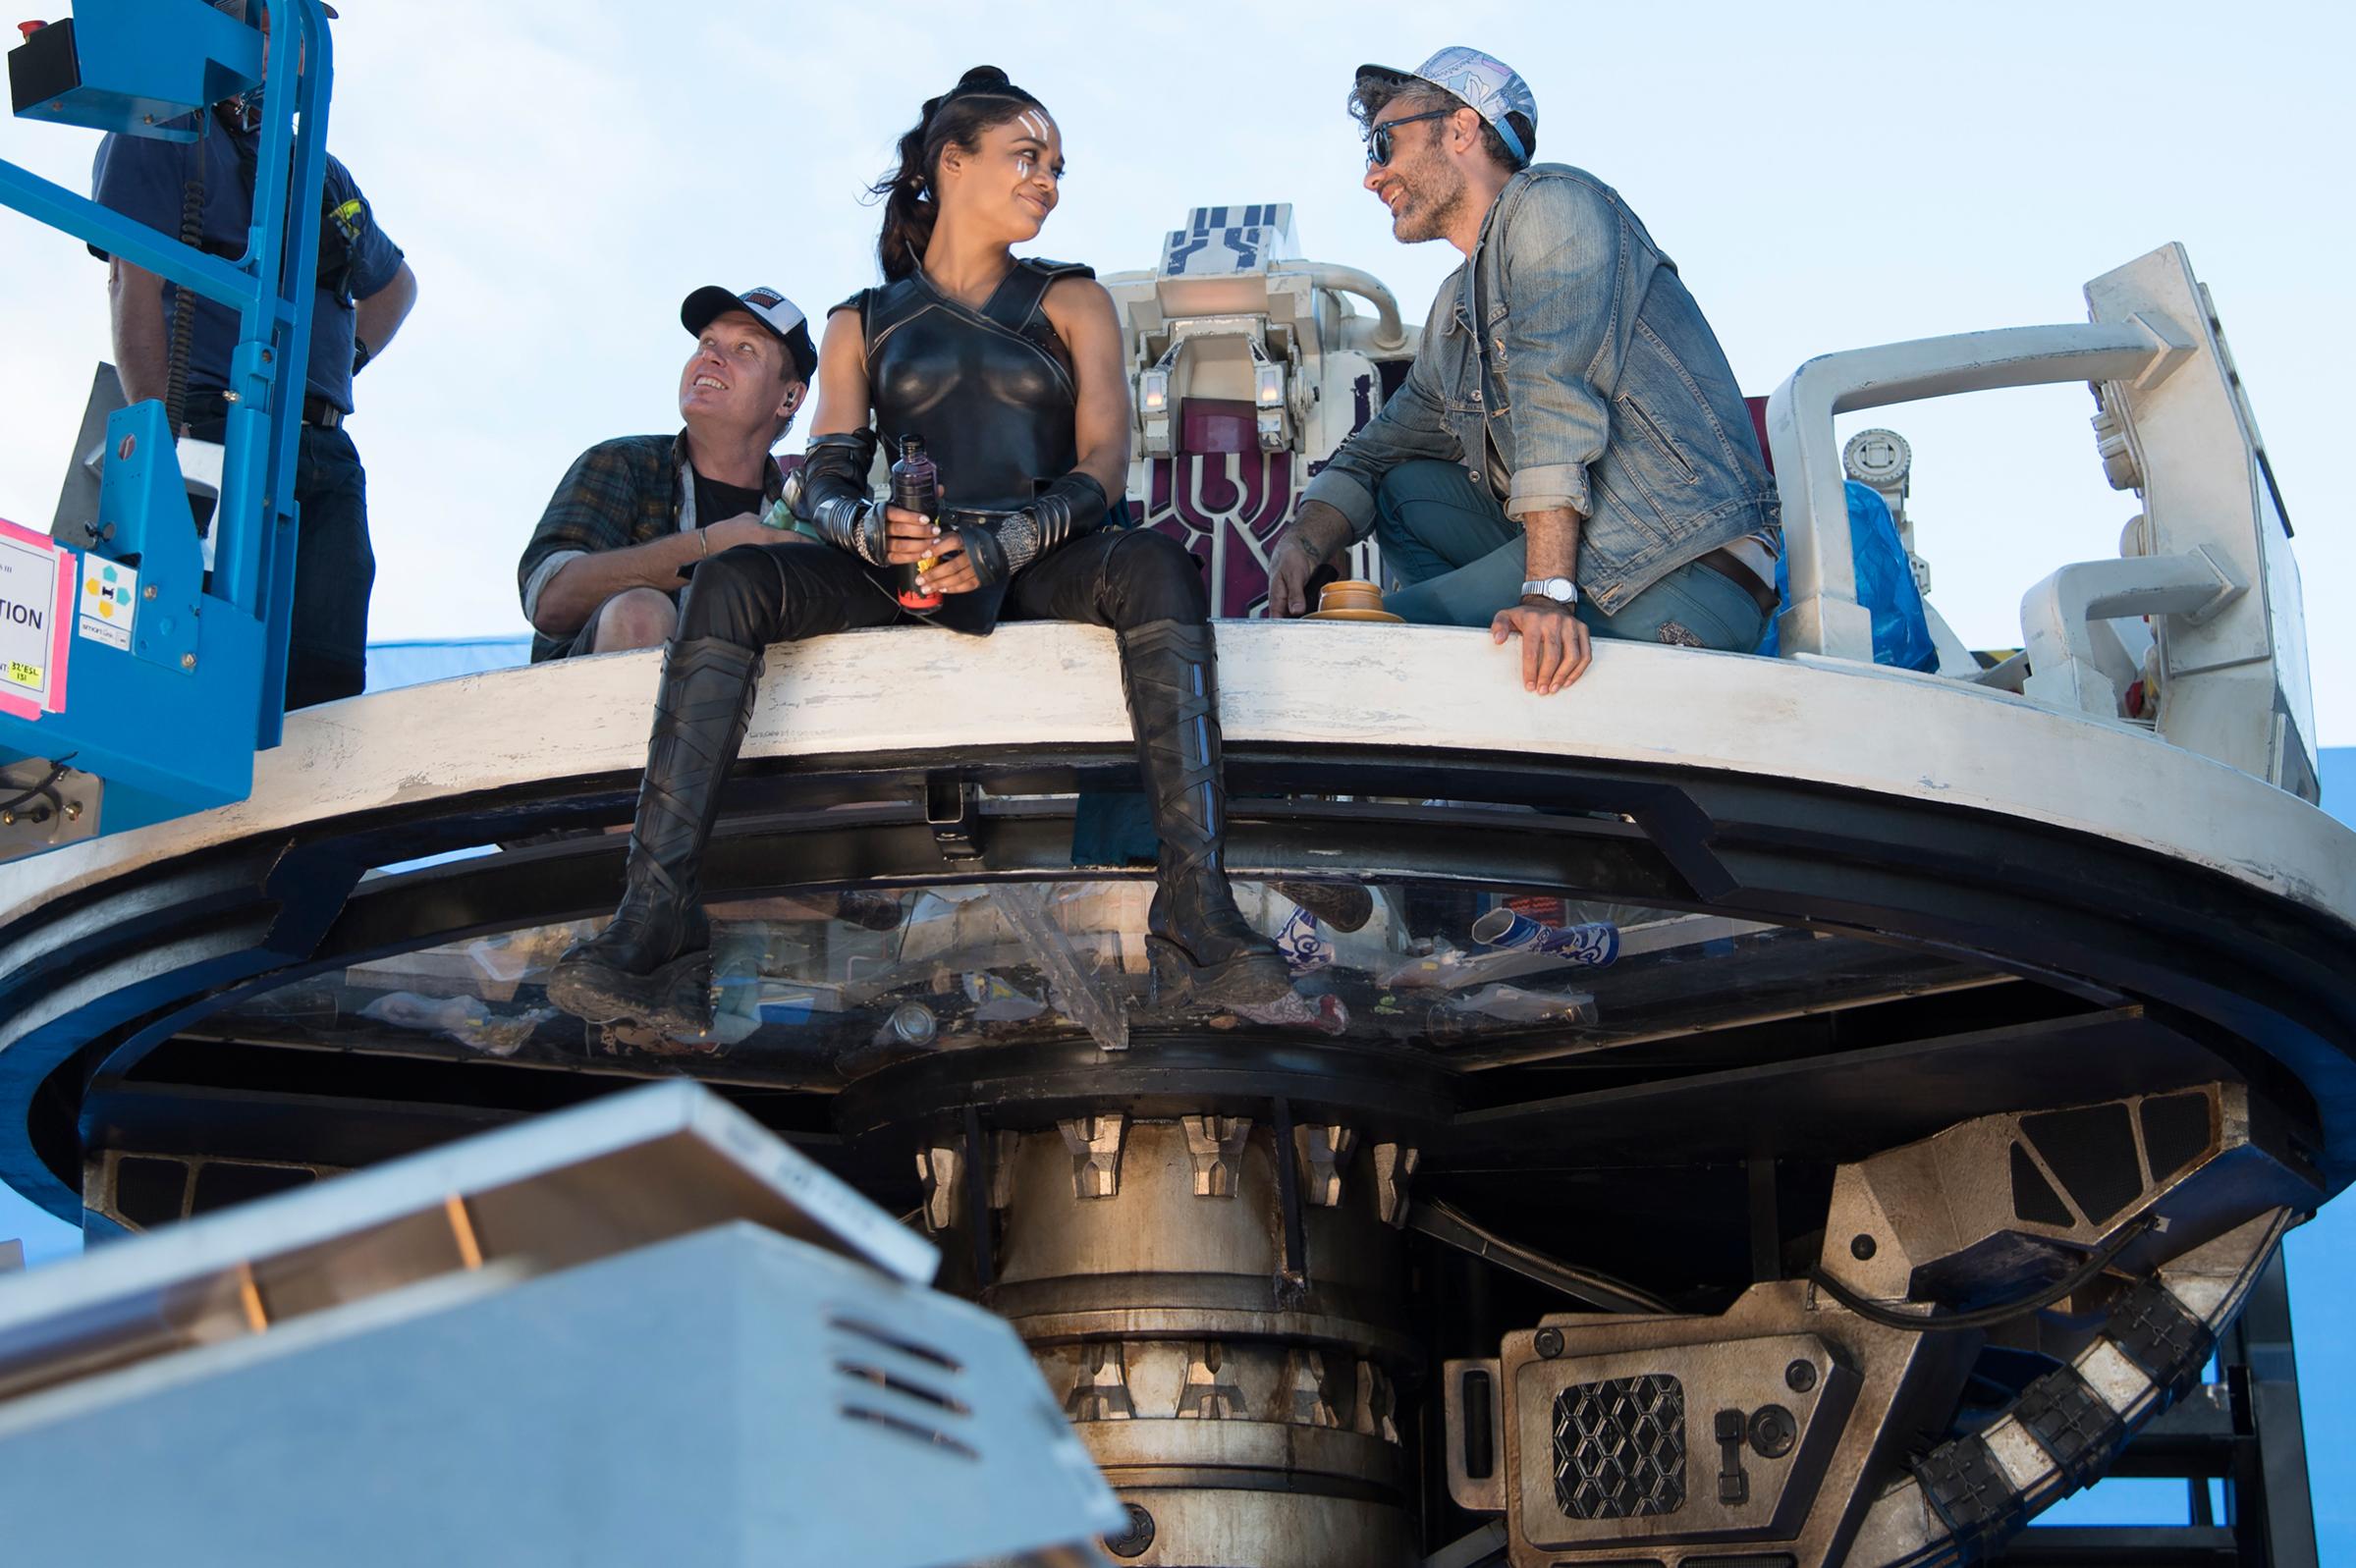 Waititi coaxed stars like Cate Blanchett, Jeff Goldblum and Tessa Thompson (above) to flex their comedic muscles on the set of Thor in Australia.